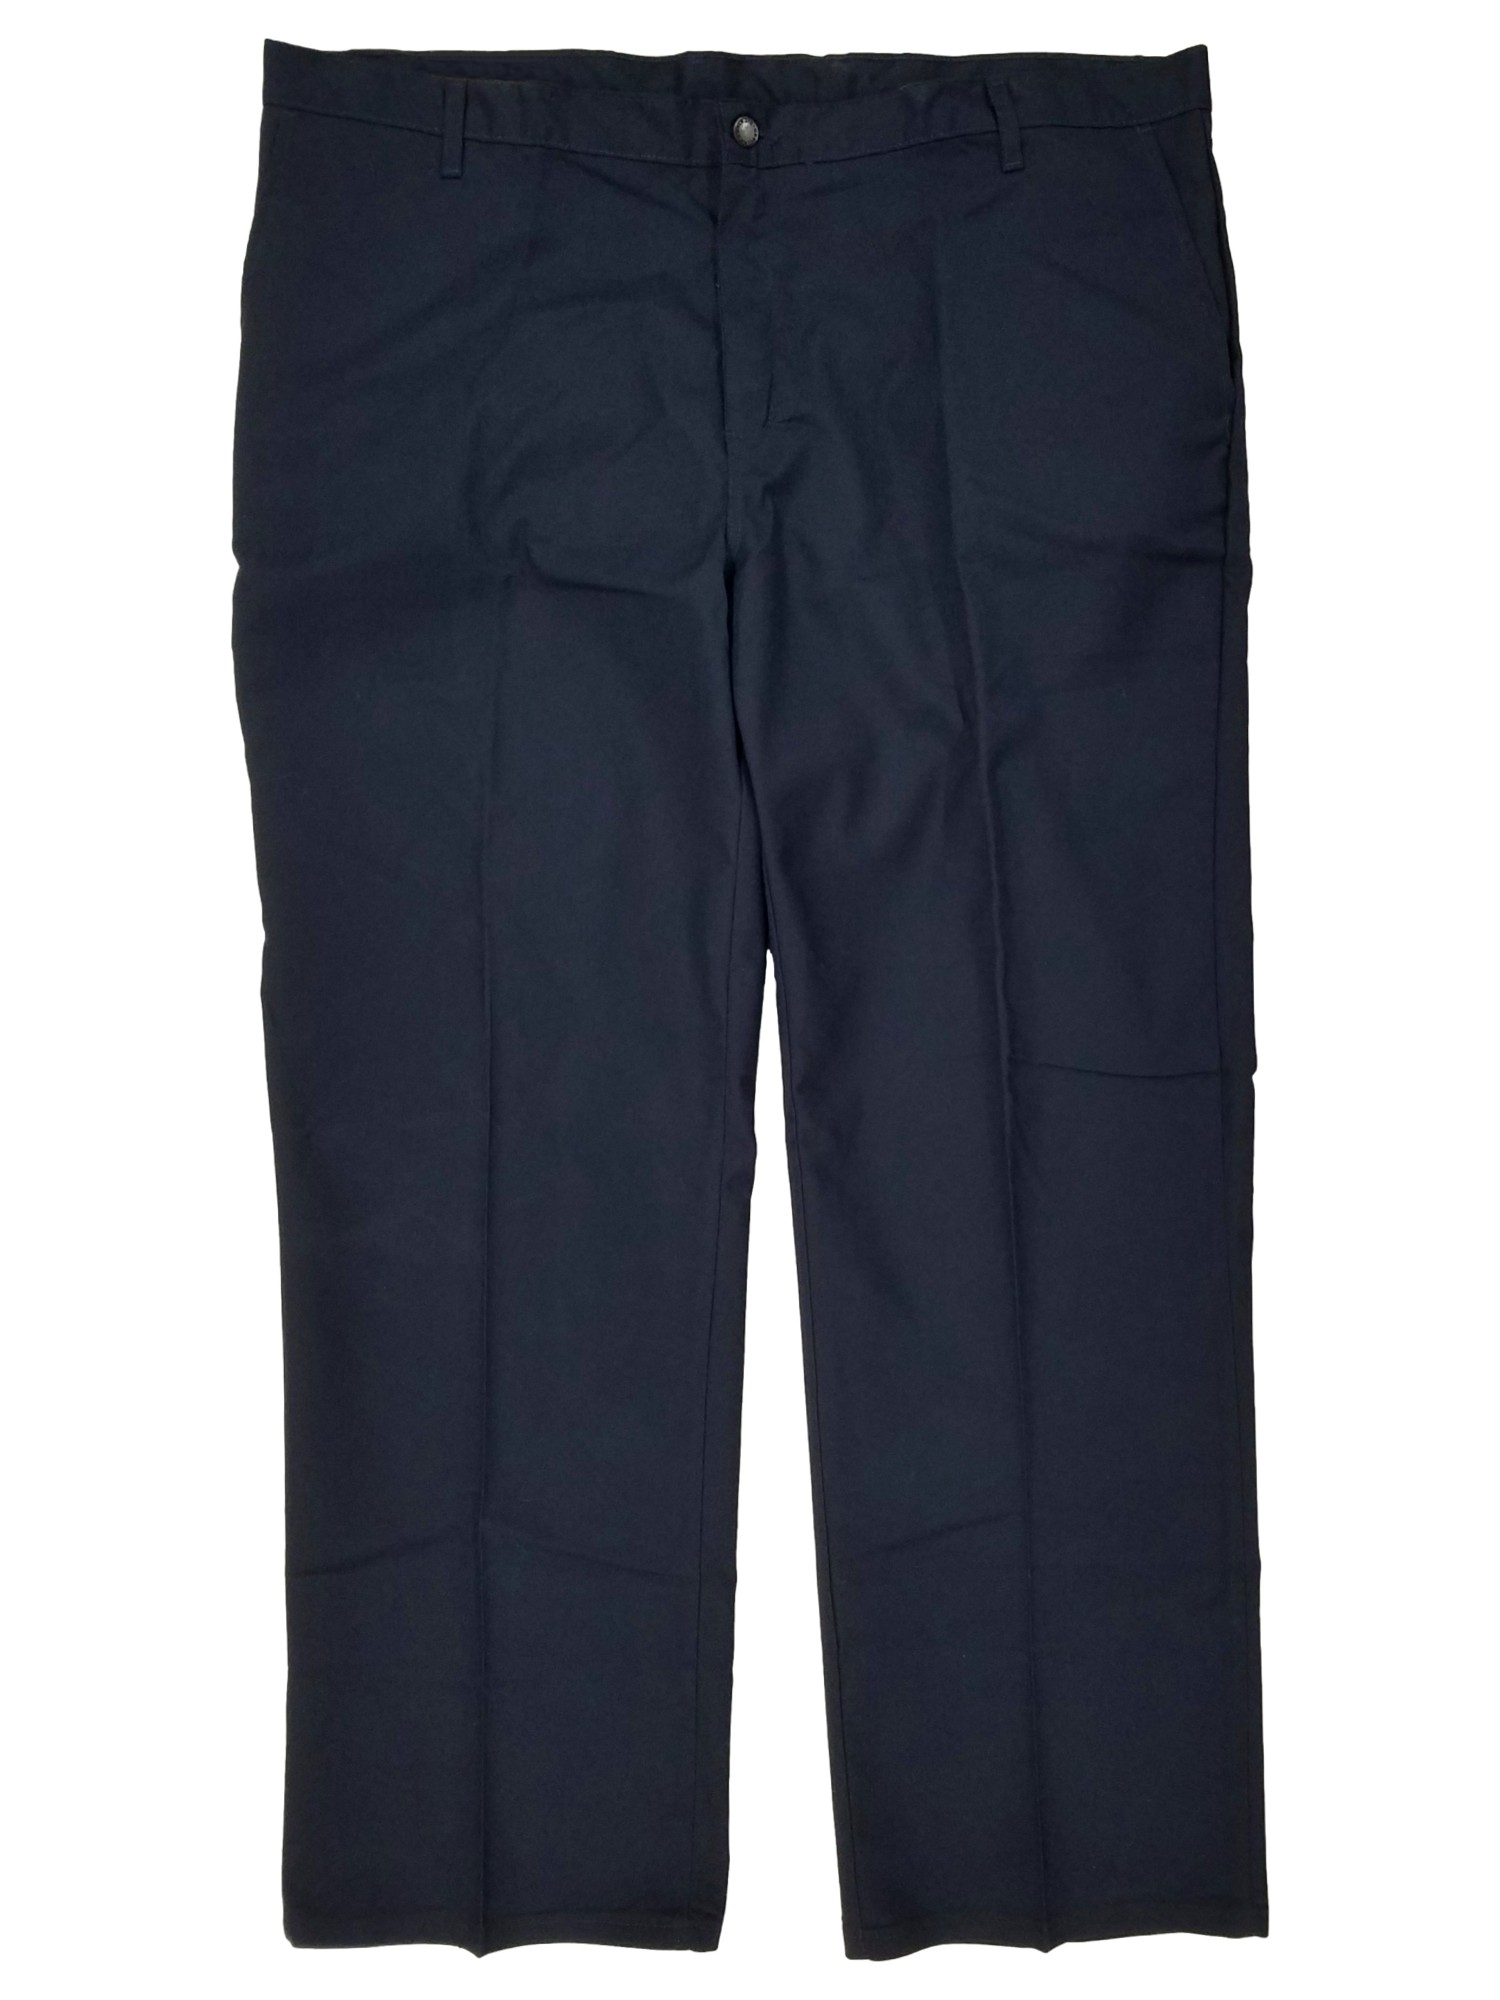 Genuine Dickies Mens Navy Straight Leg Relaxed Fit Flat Front Flex Pants